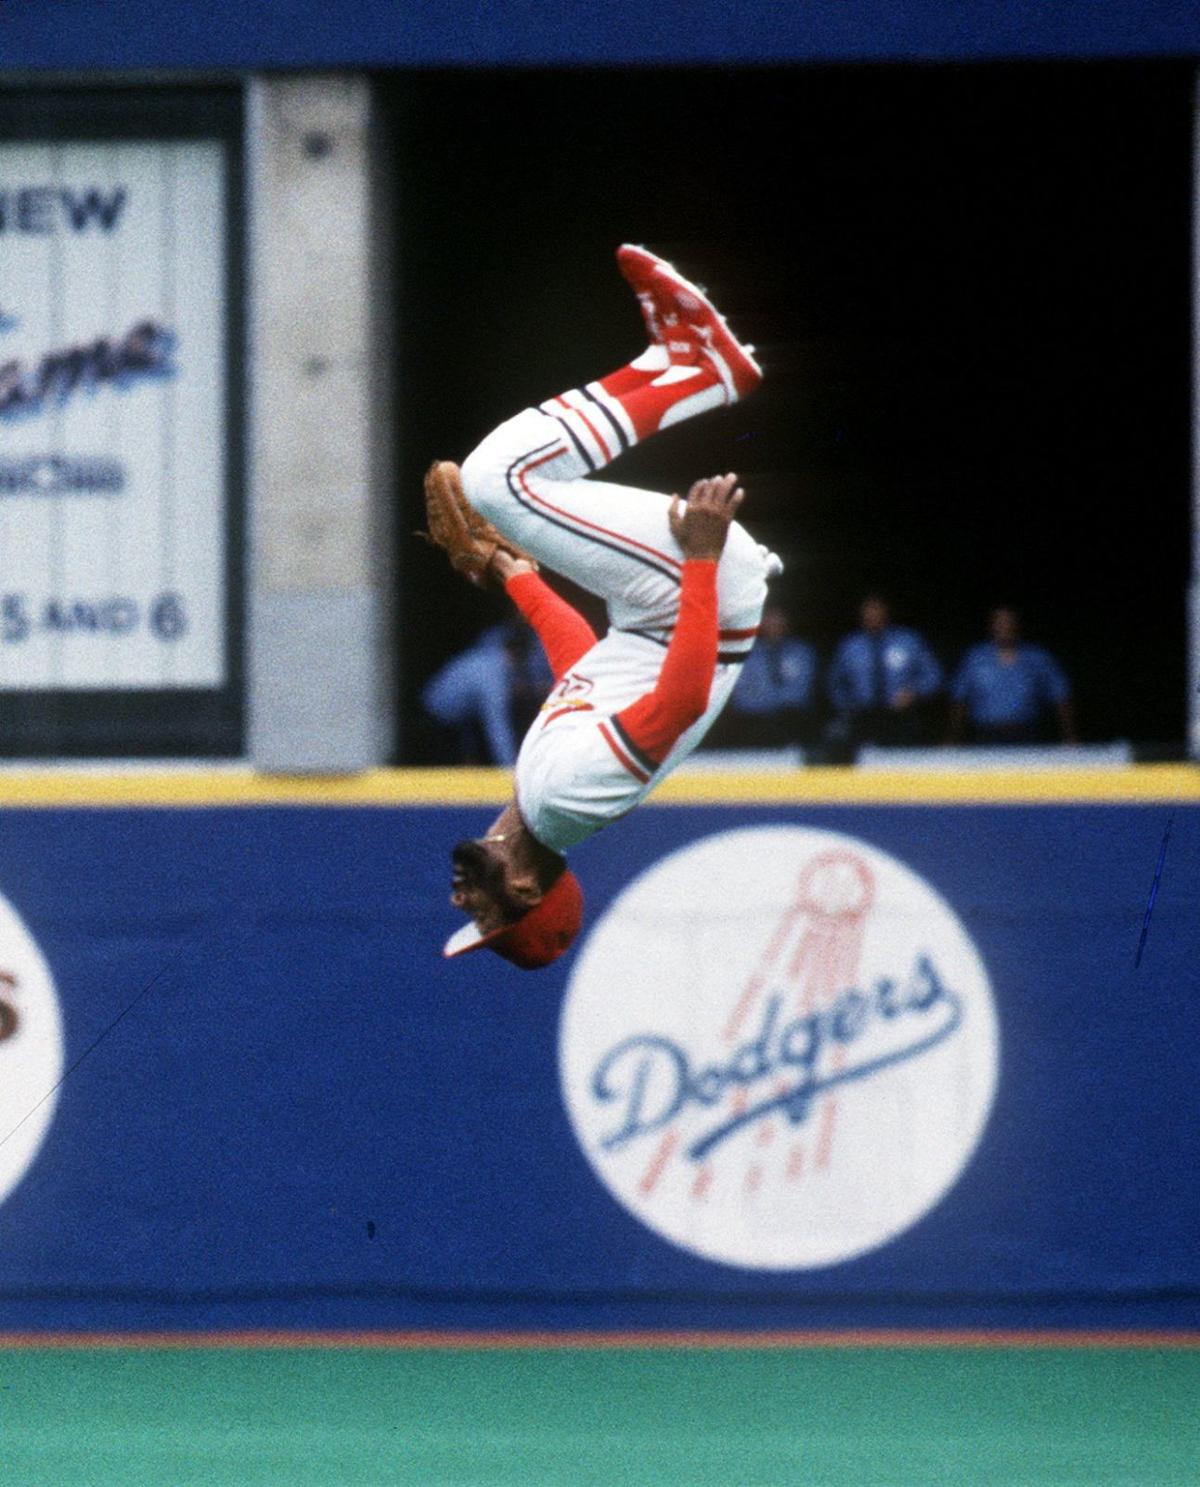 Download Ozzie Smith Photocard Wallpaper